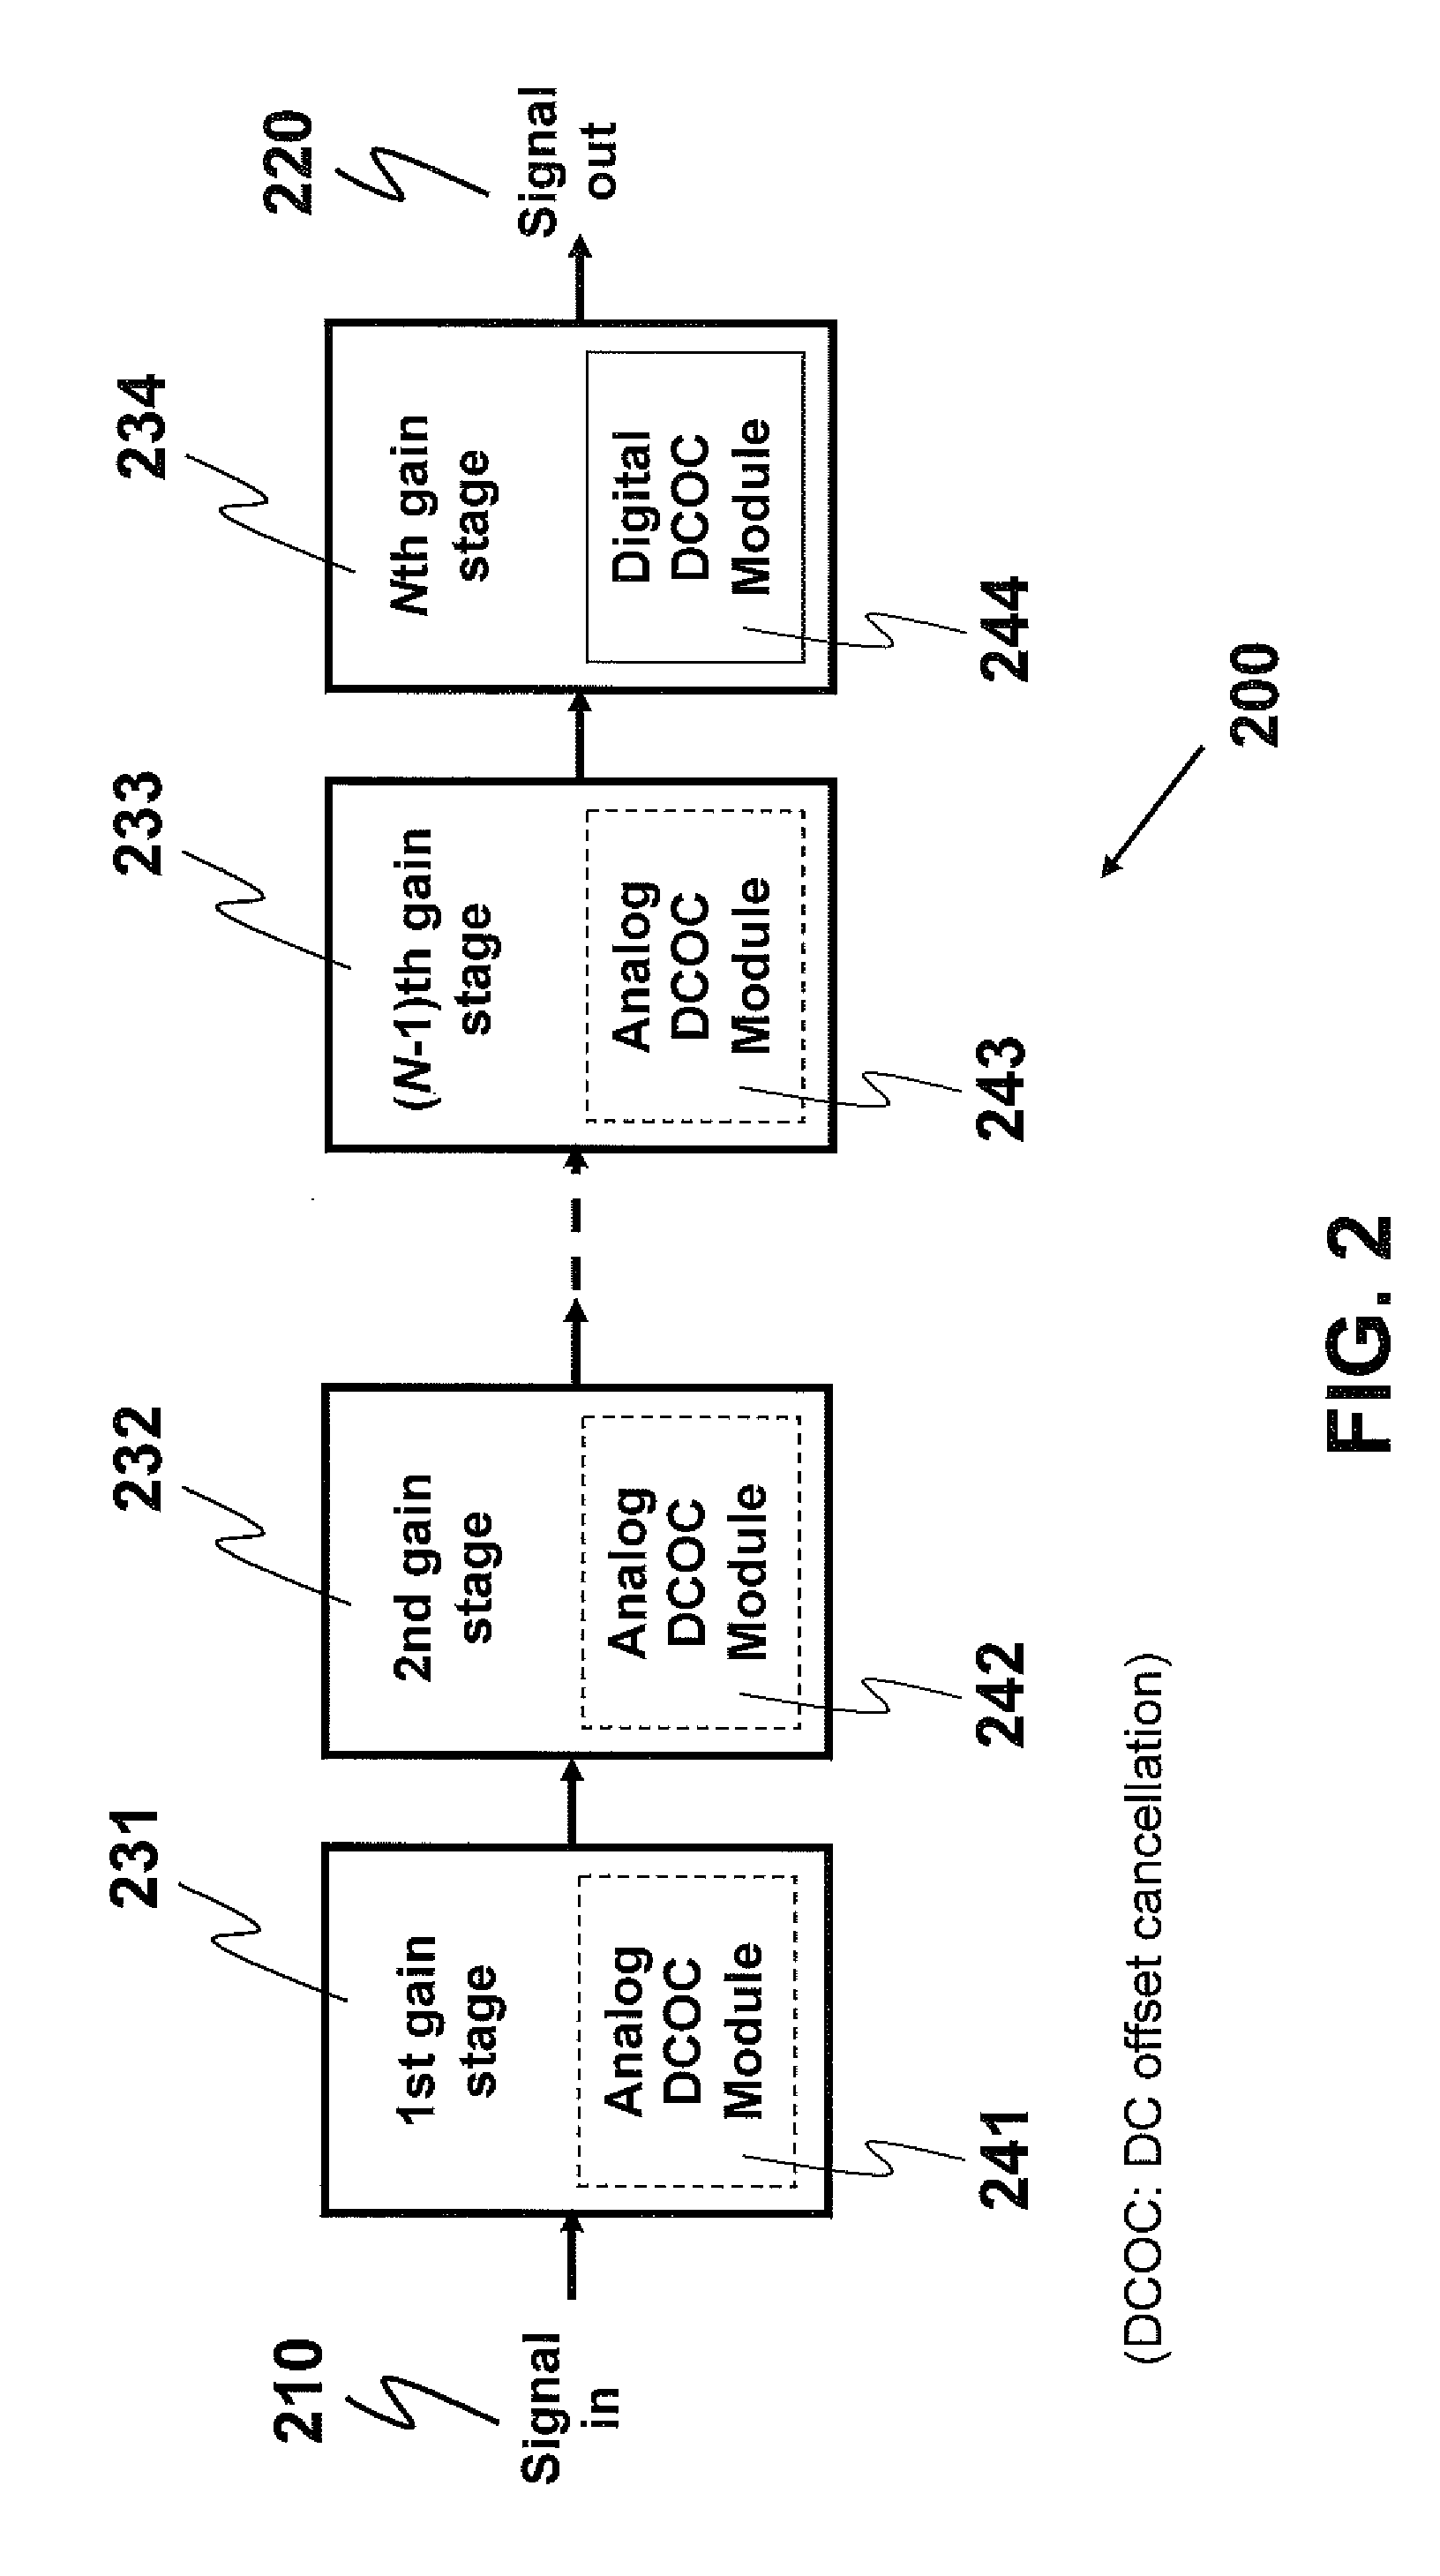 DC offset cancellation for a multi-stage amplifier